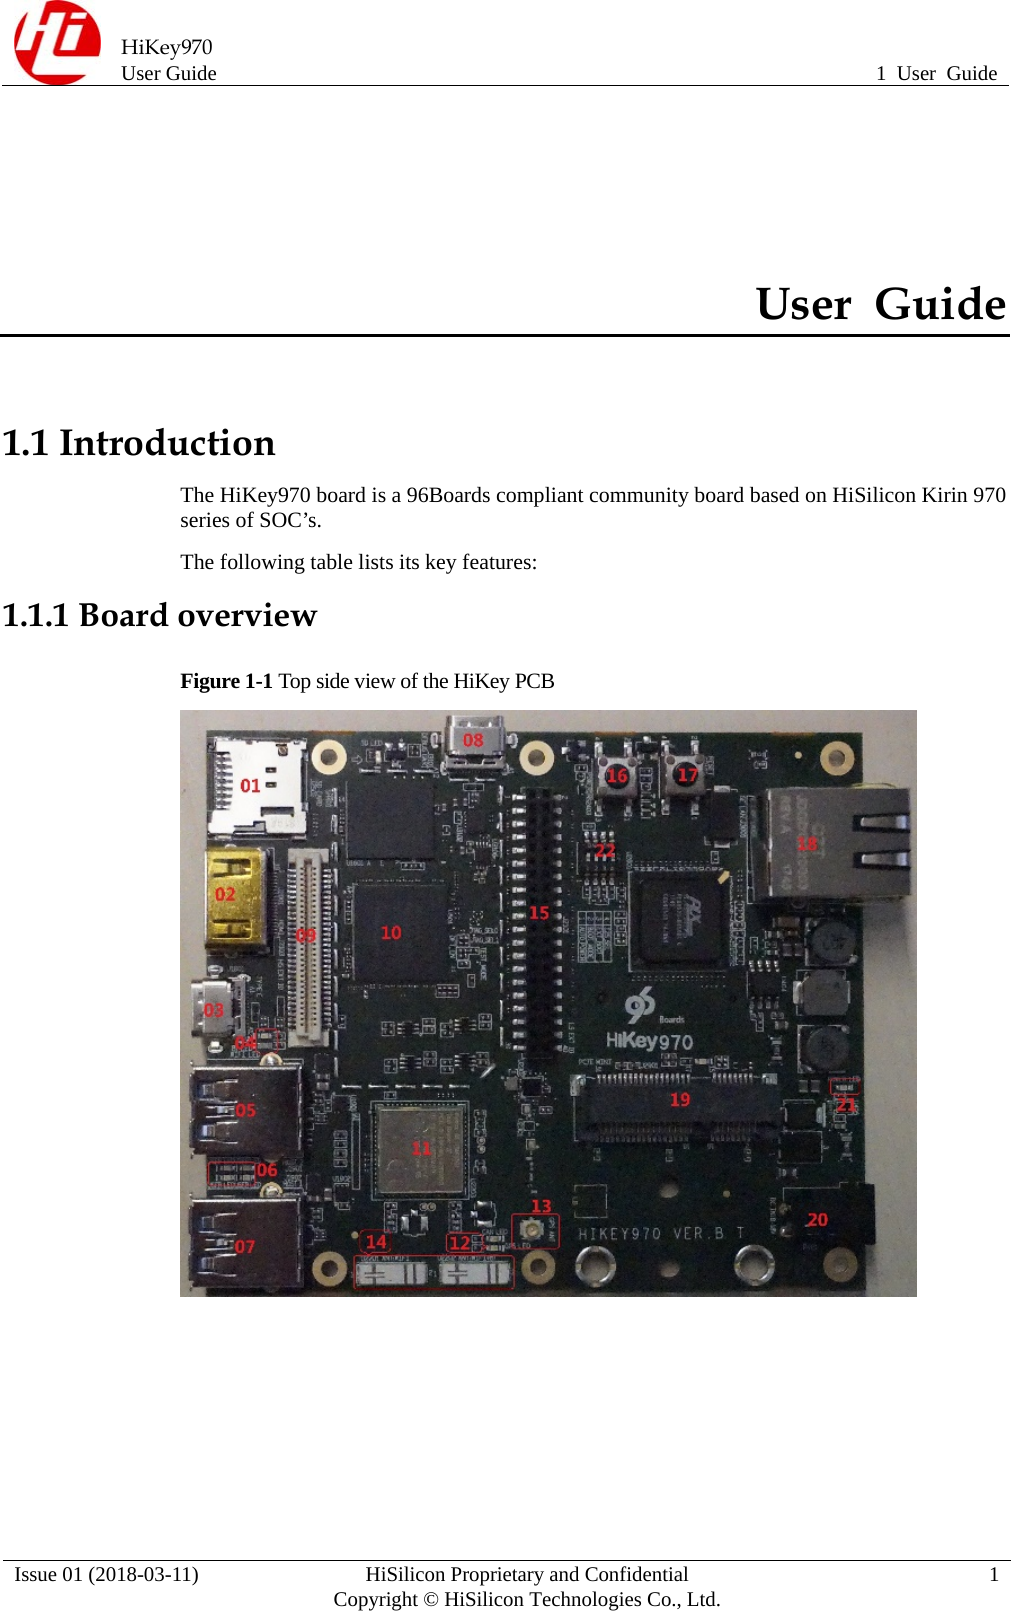  HiKey970 User Guide  1 User Guide Issue 01 (2018-03-11)  HiSilicon Proprietary and Confidential          Copyright © HiSilicon Technologies Co., Ltd.  1 User Guide 1.1 IntroductionThe HiKey970 board is a 96Boards compliant community board based on HiSilicon Kirin 970 series of SOC’s. The following table lists its key features: 1.1.1 Board overview Figure 1-1 Top side view of the HiKey PCB   